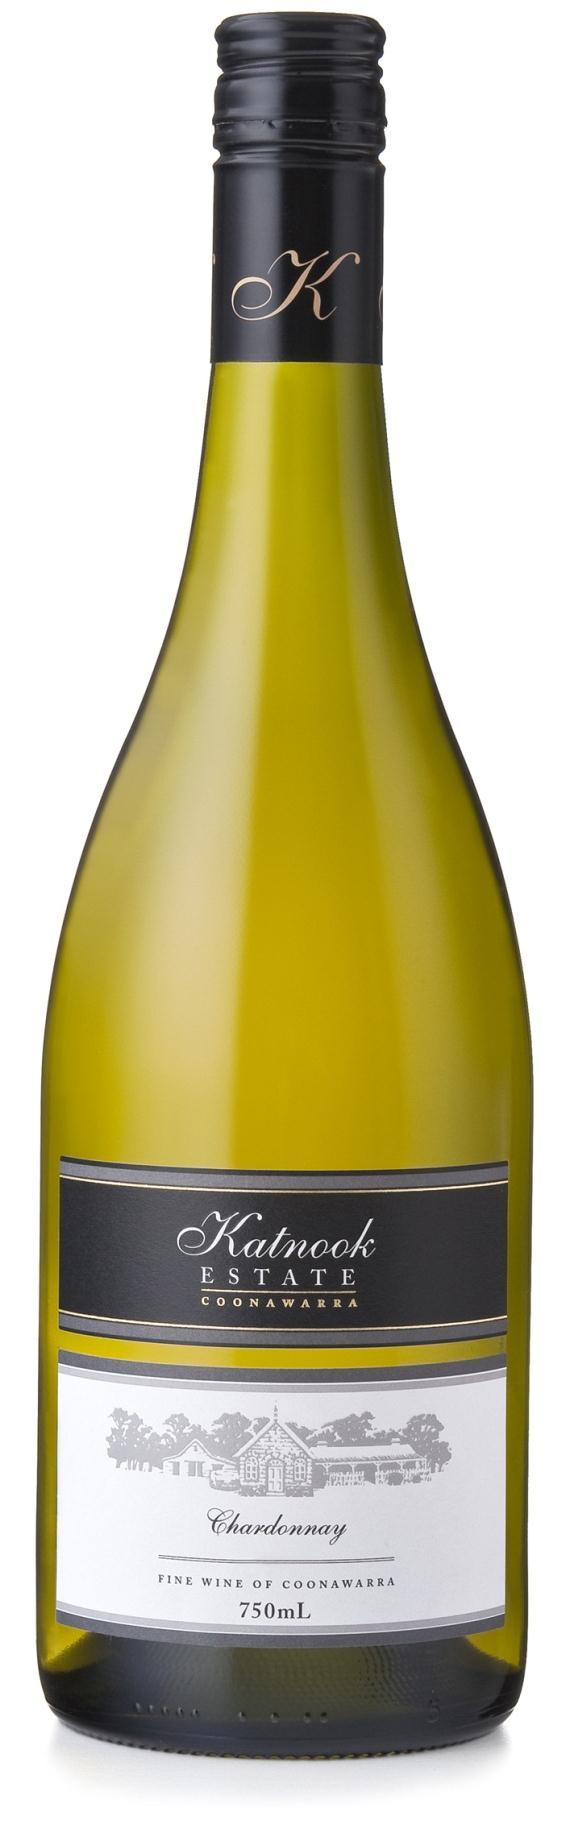 Katnook Estate Chardonnay 2011 The Katnook Estate range of premium quality, single varietal wines are an expression of the classic and unique characteristics of the Coonawarra wine region.